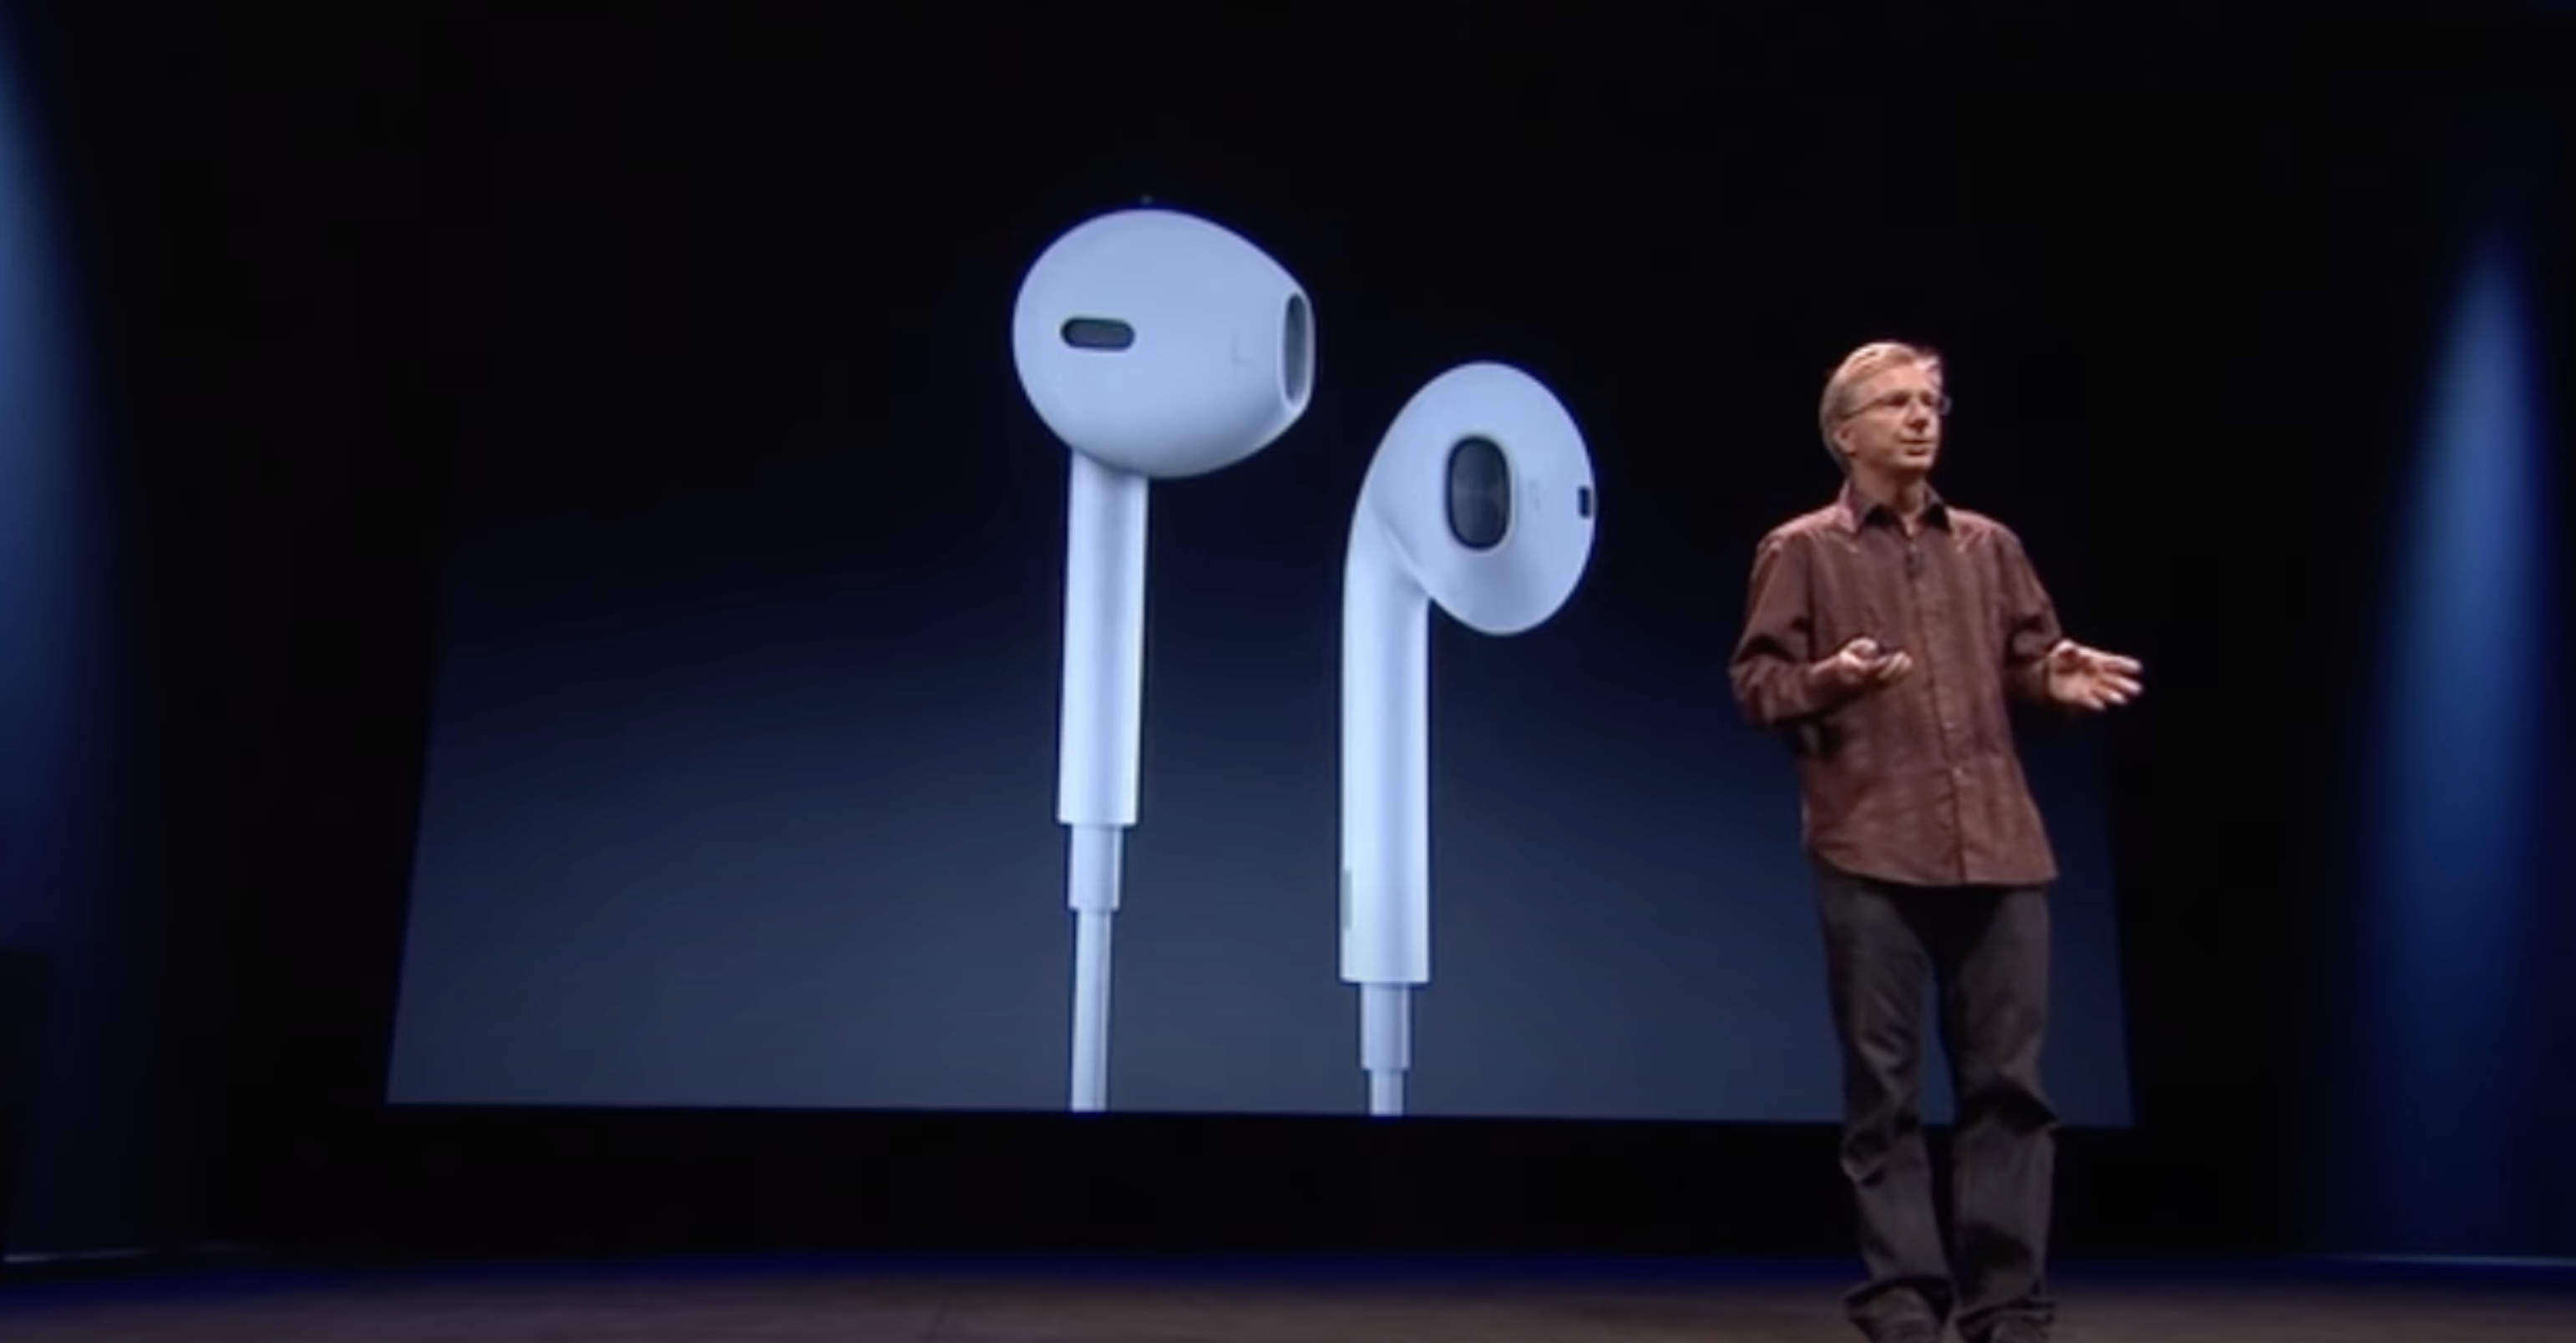 Are AirPods not cool anymore? Gen Z and the rise of wired headphones